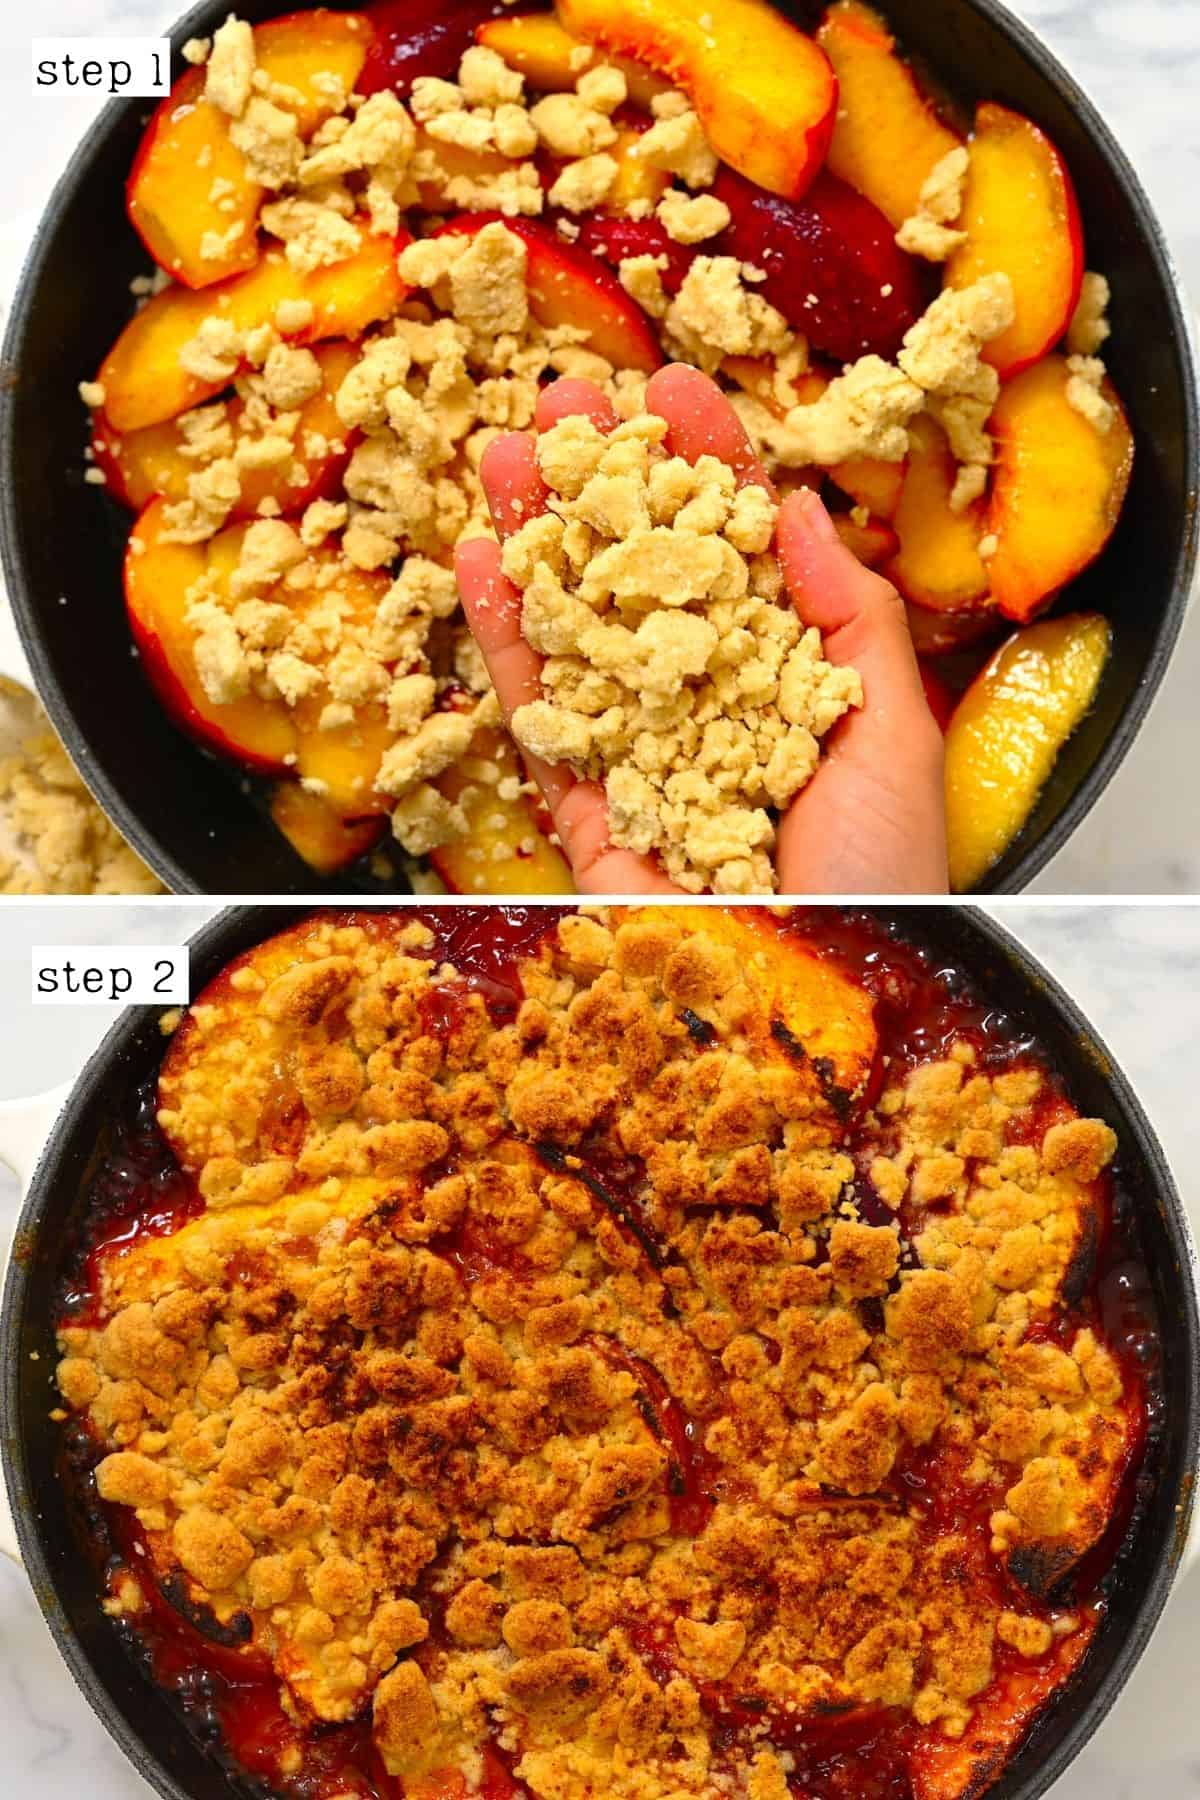 Steps for making peach crumble